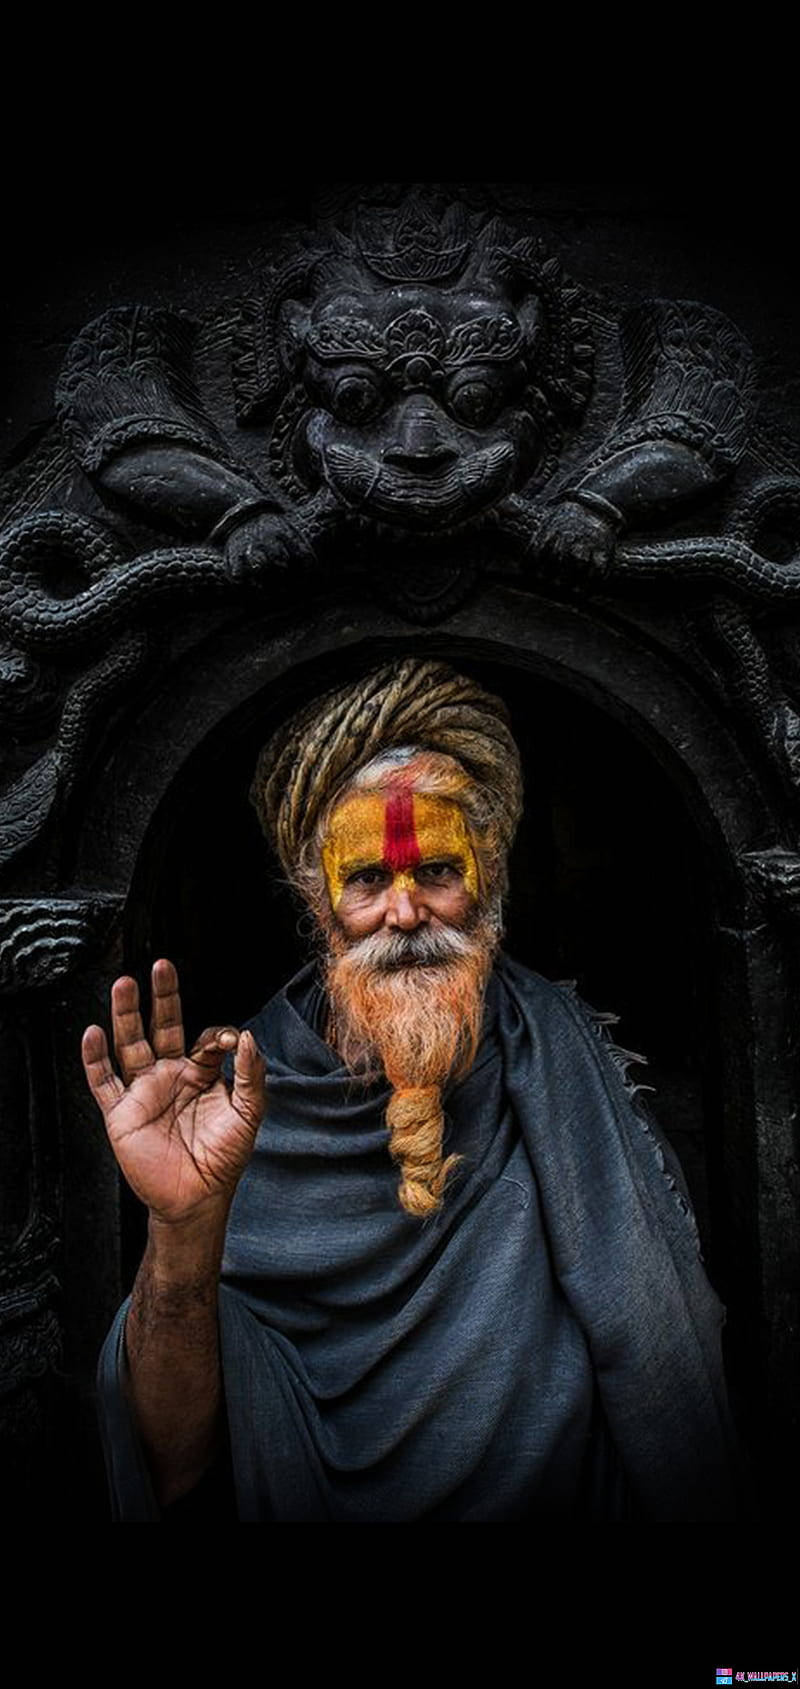 Free stock photo of adult, aghori, asia, baba, beard, ceremony, city,  clothing, costume, culture, eyes, face disguise, festival, ghat, grey hair,  group photo, guru, hairstyle, hindu, hinduism, india, loc, long beard,  looking